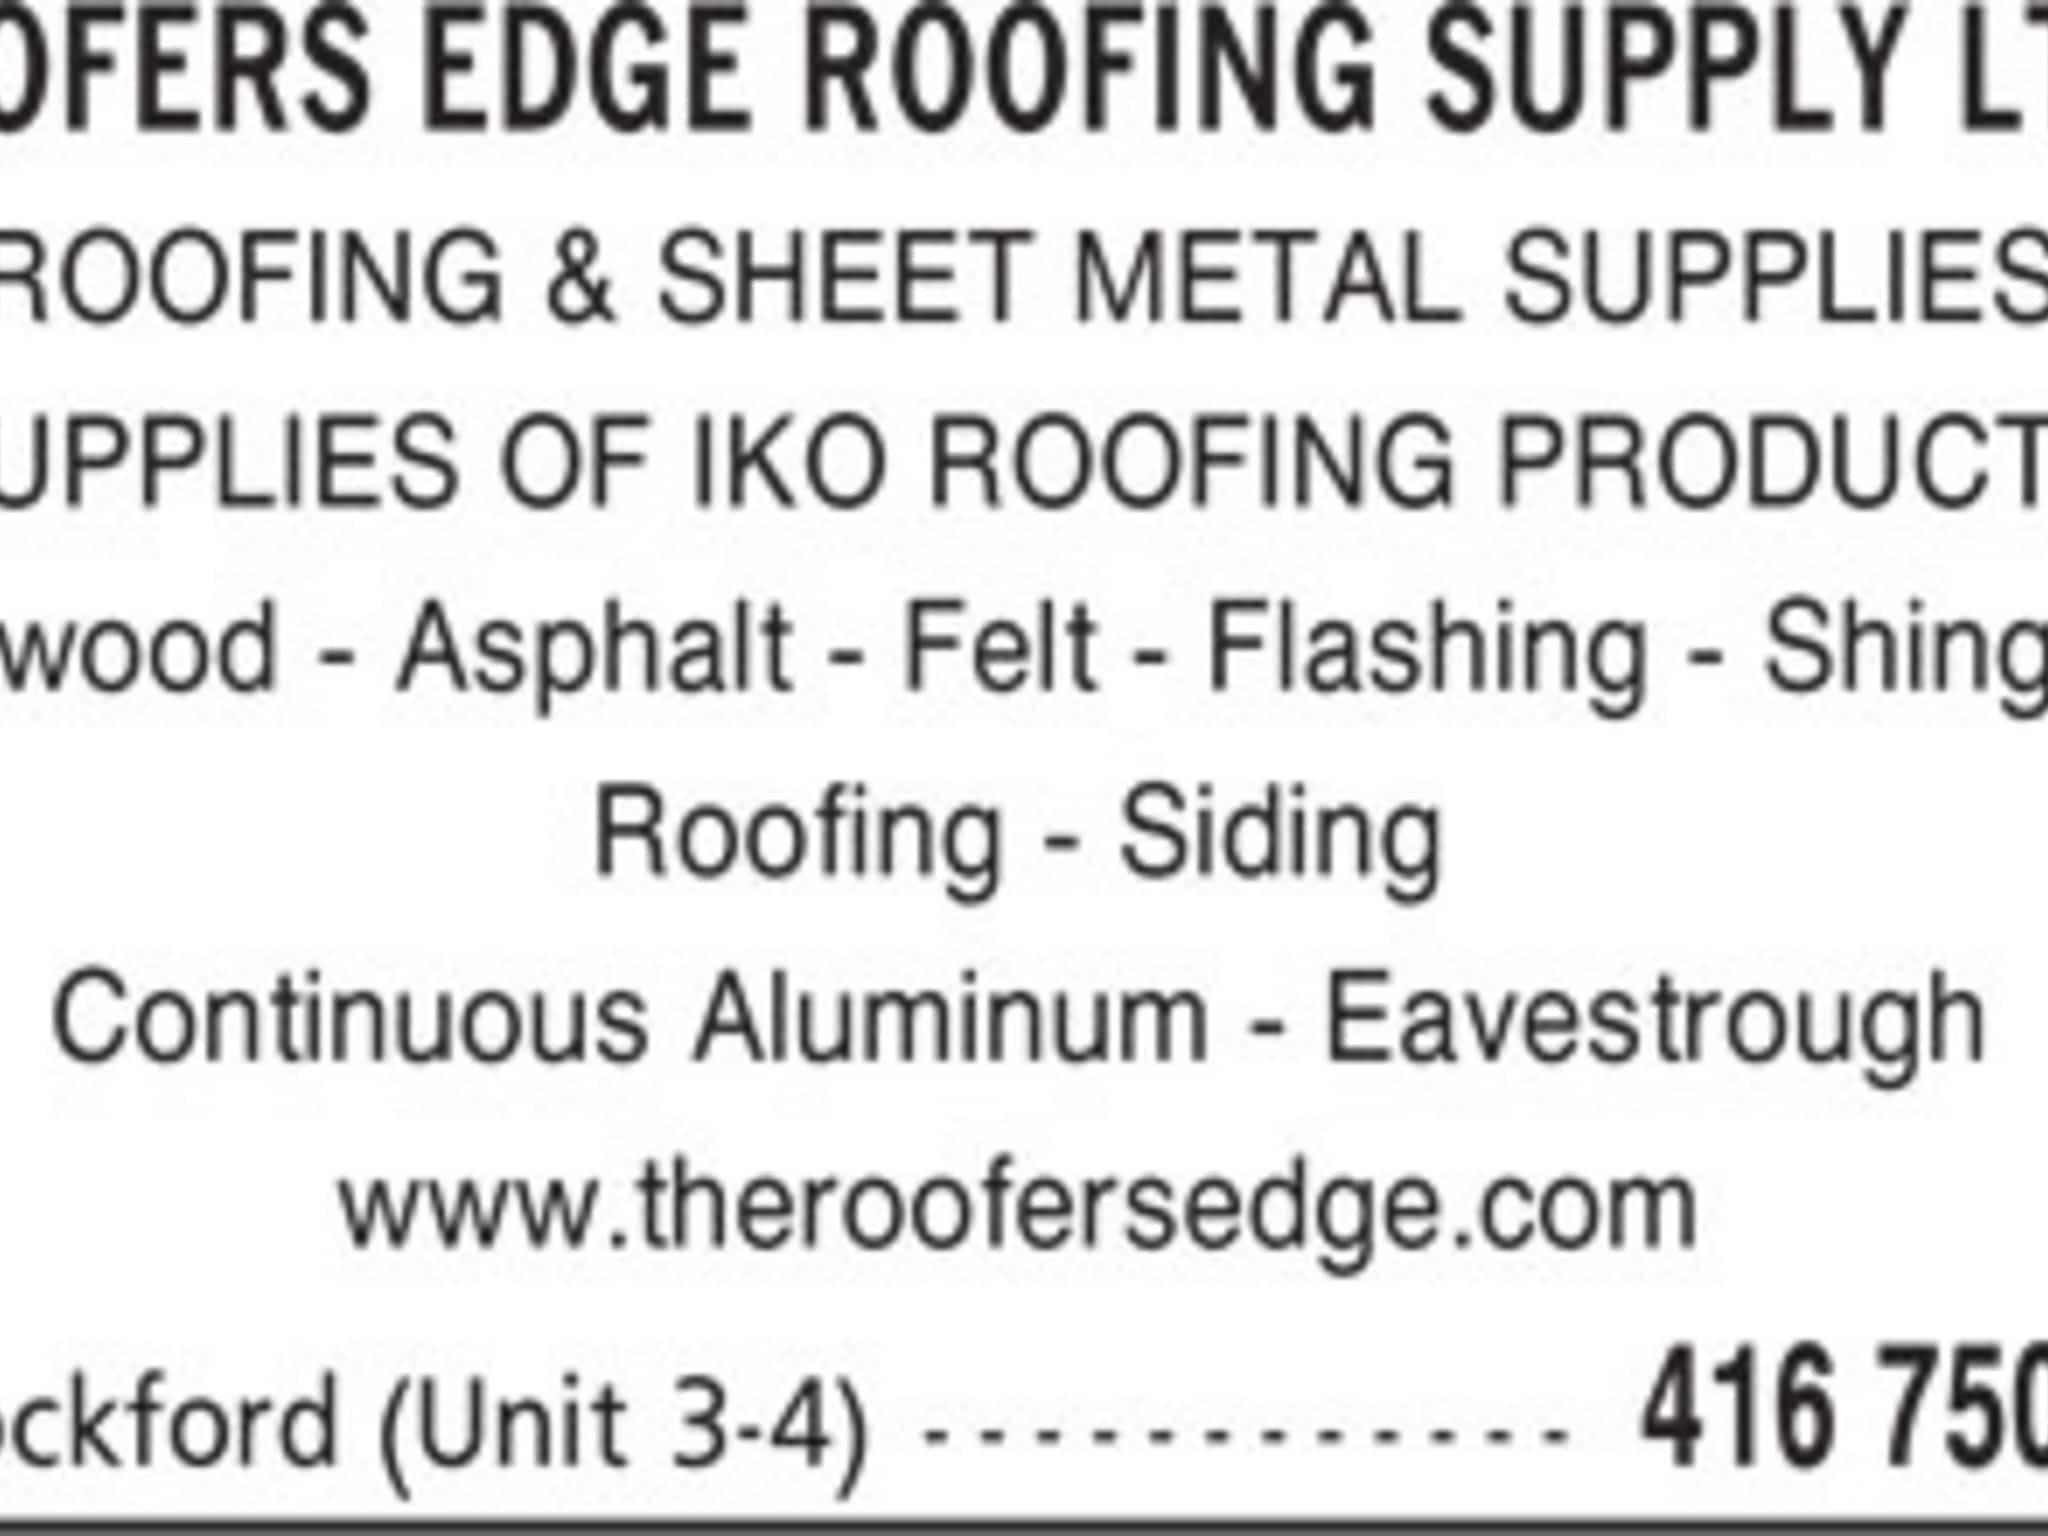 photo Roofers Edge Roofing Supply Ltd